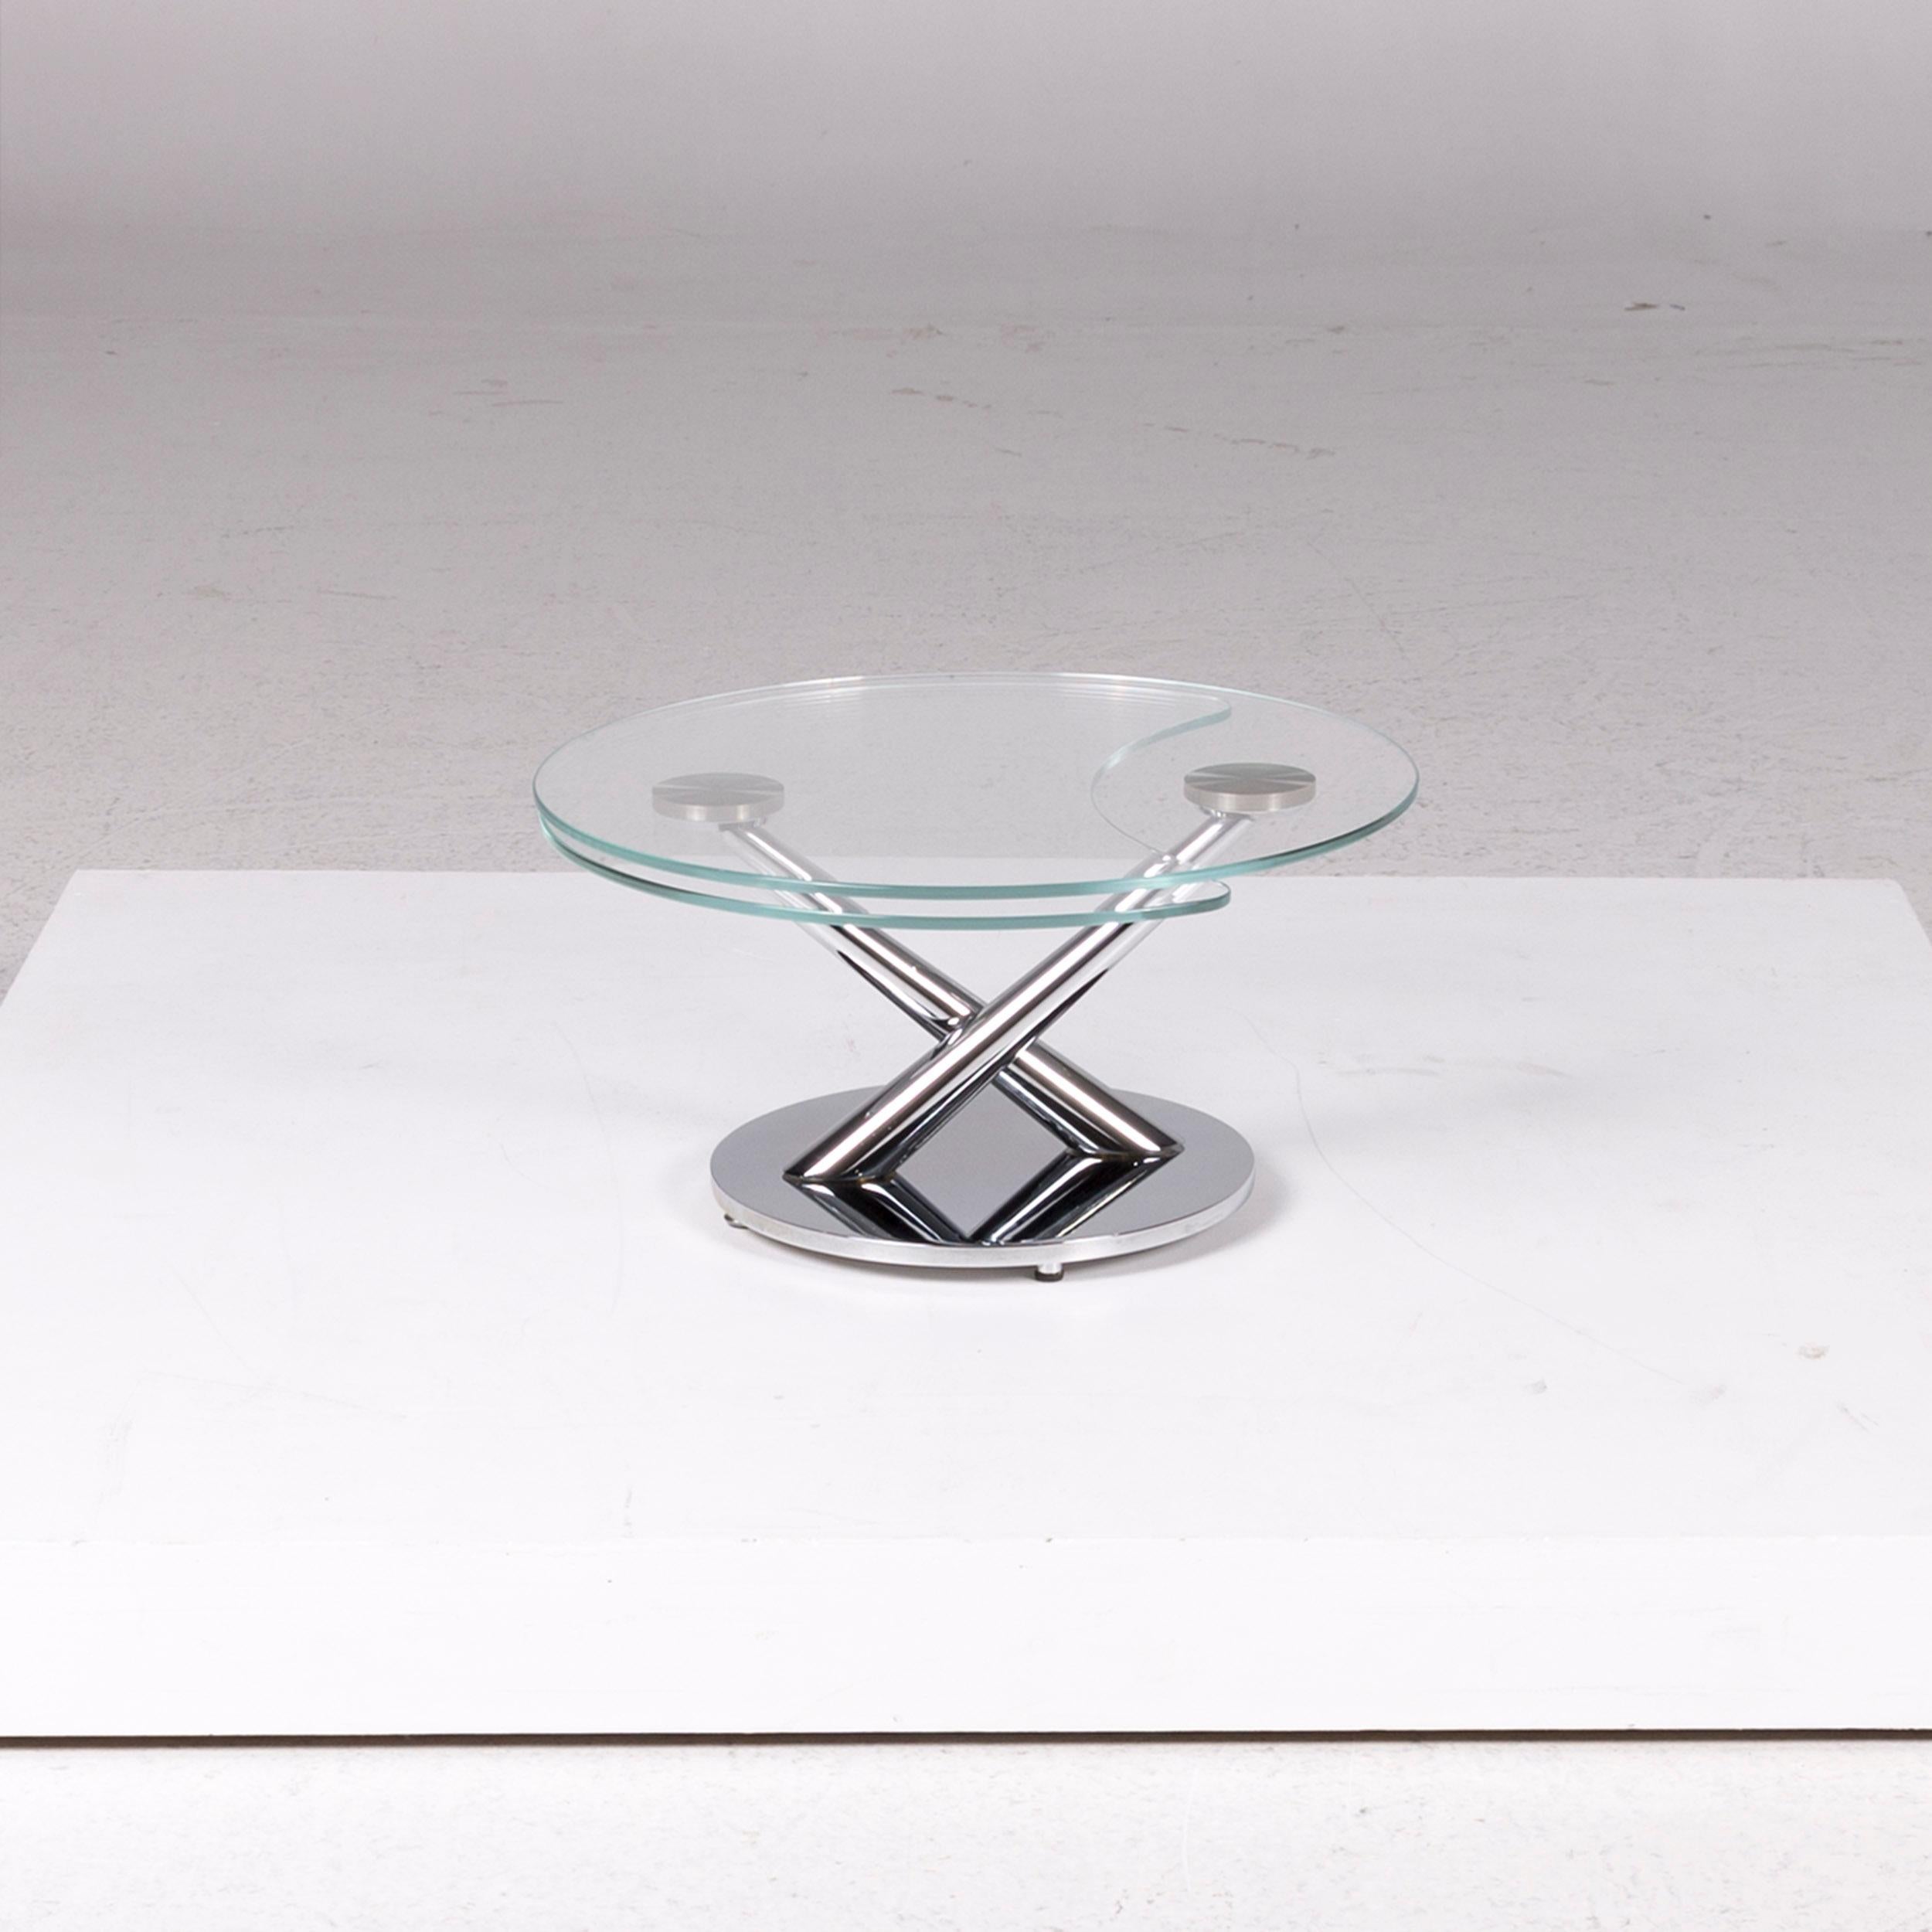 European NAOS glass coffee table round movable function table